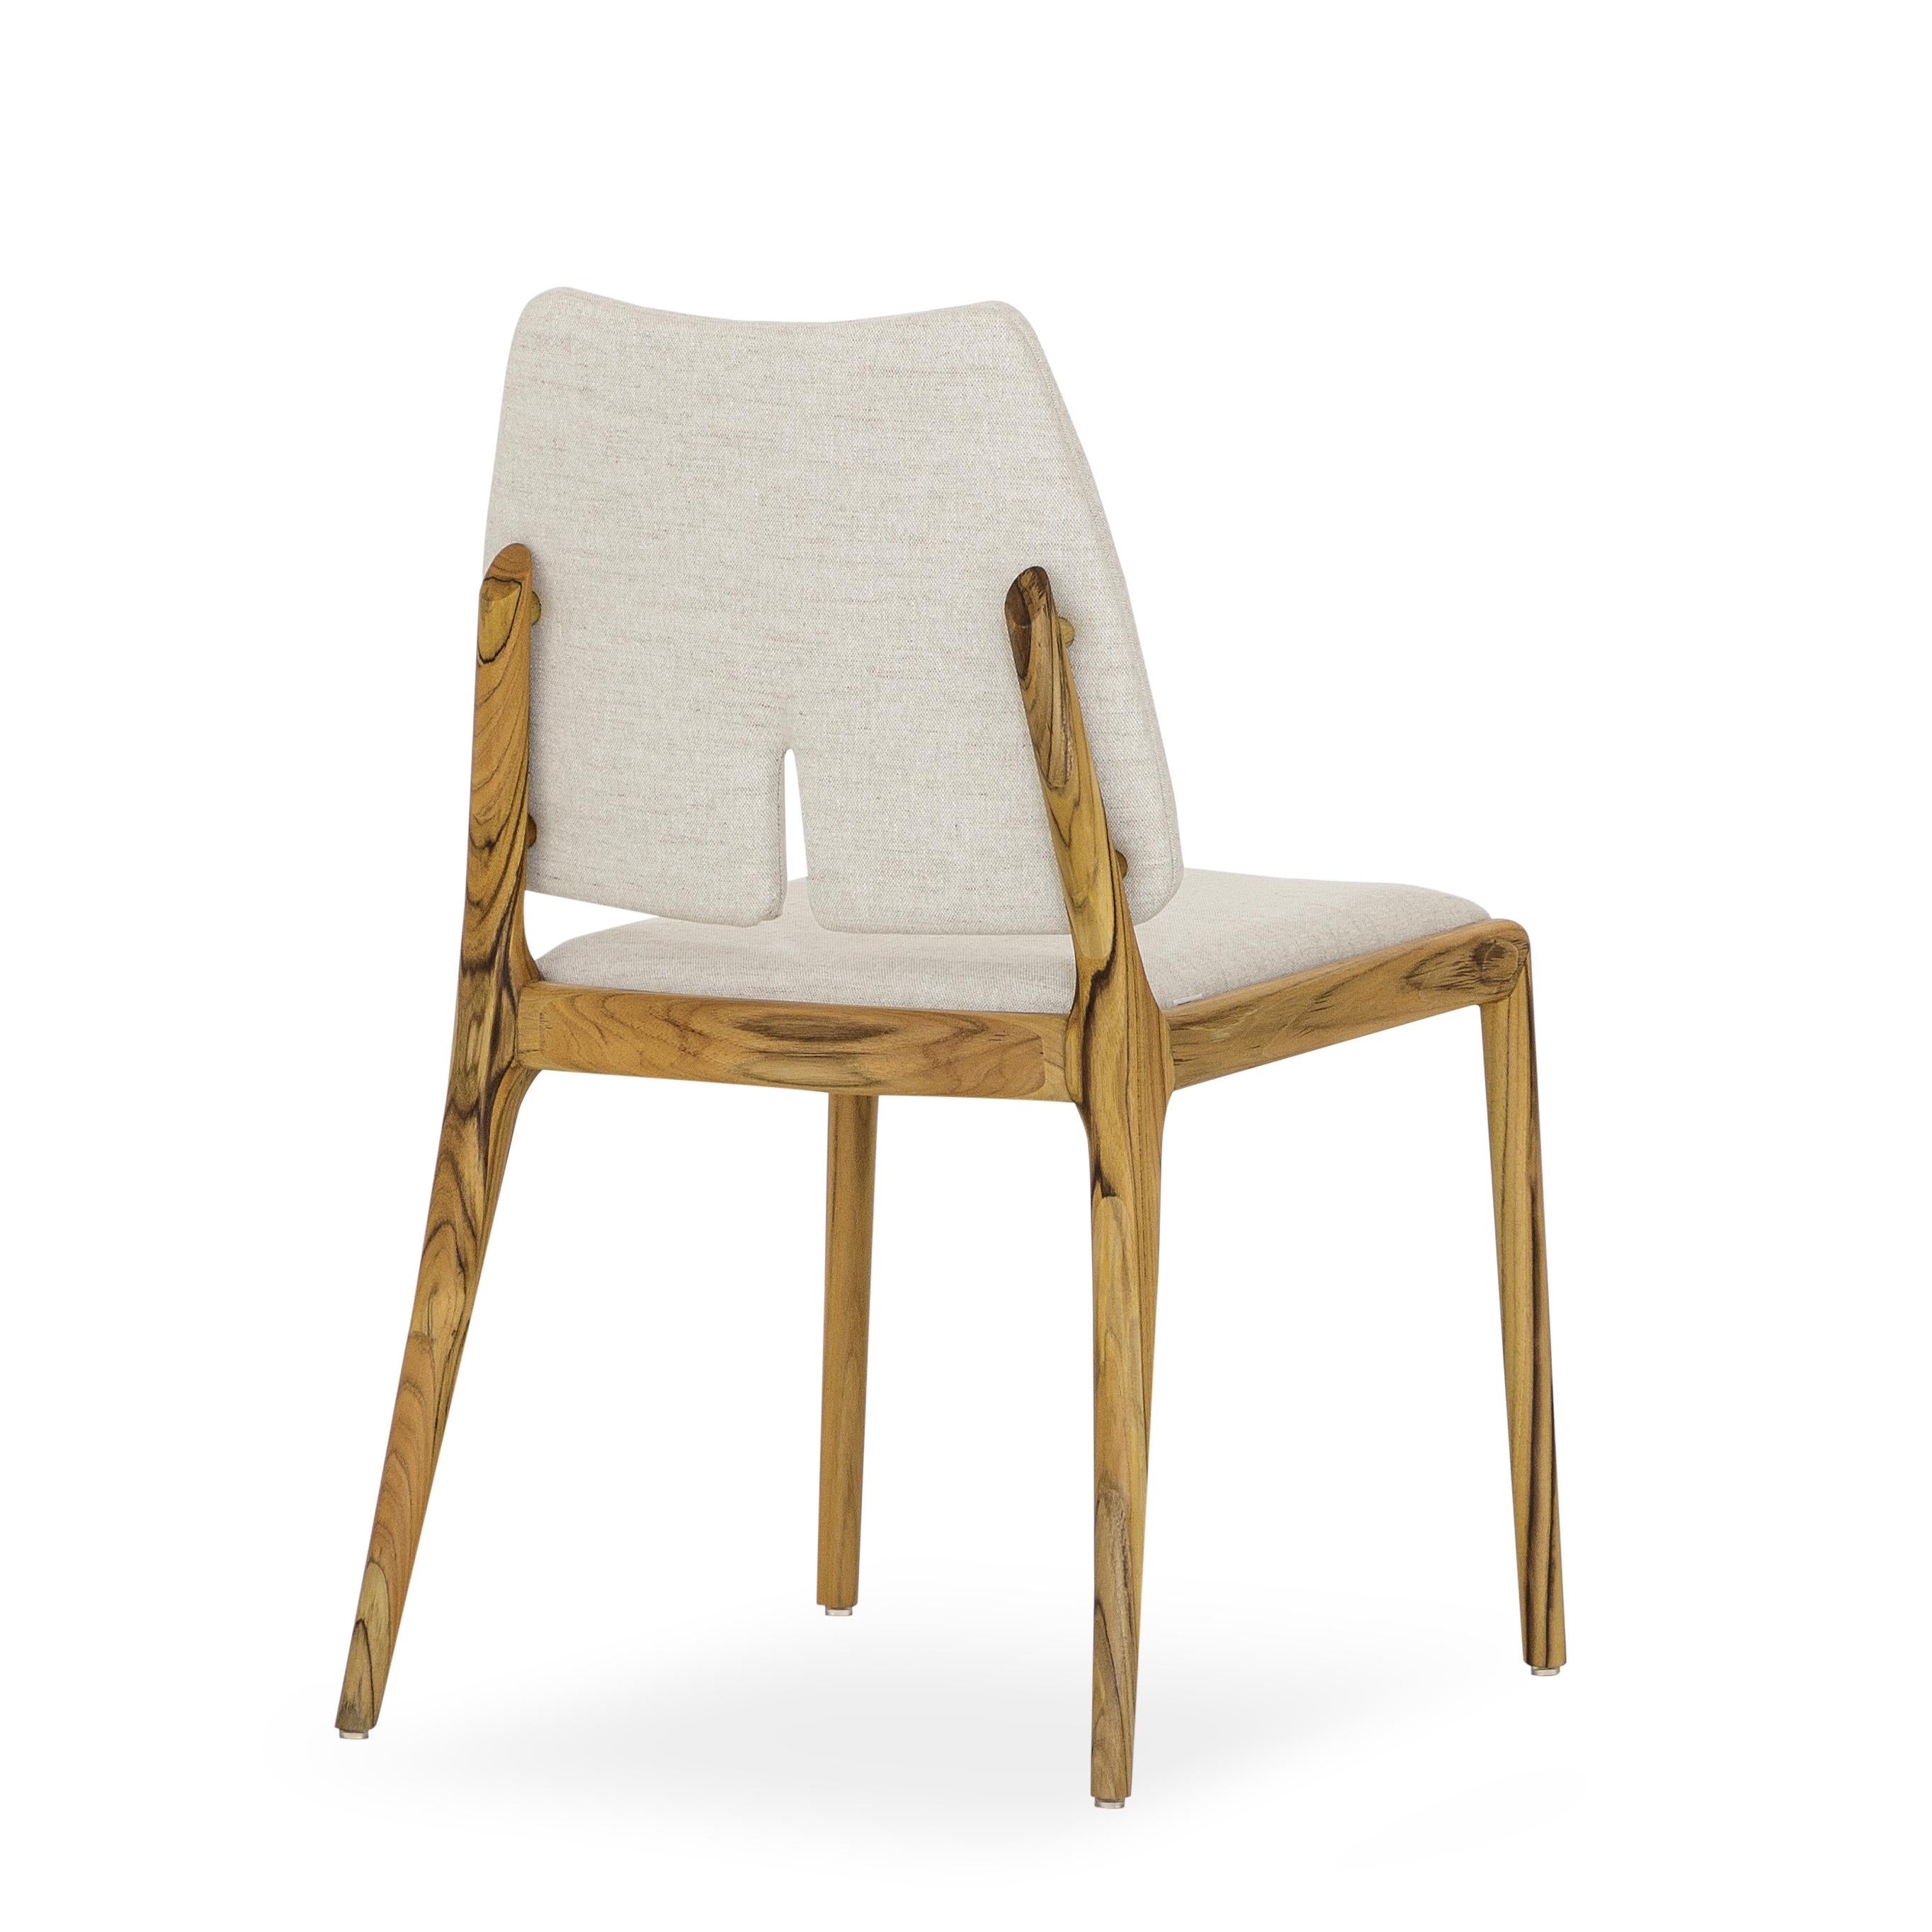 Brazilian Slit Dining Chair in Teak Wood Finish and Light Beige Cotton Fabric, Set of 2 For Sale